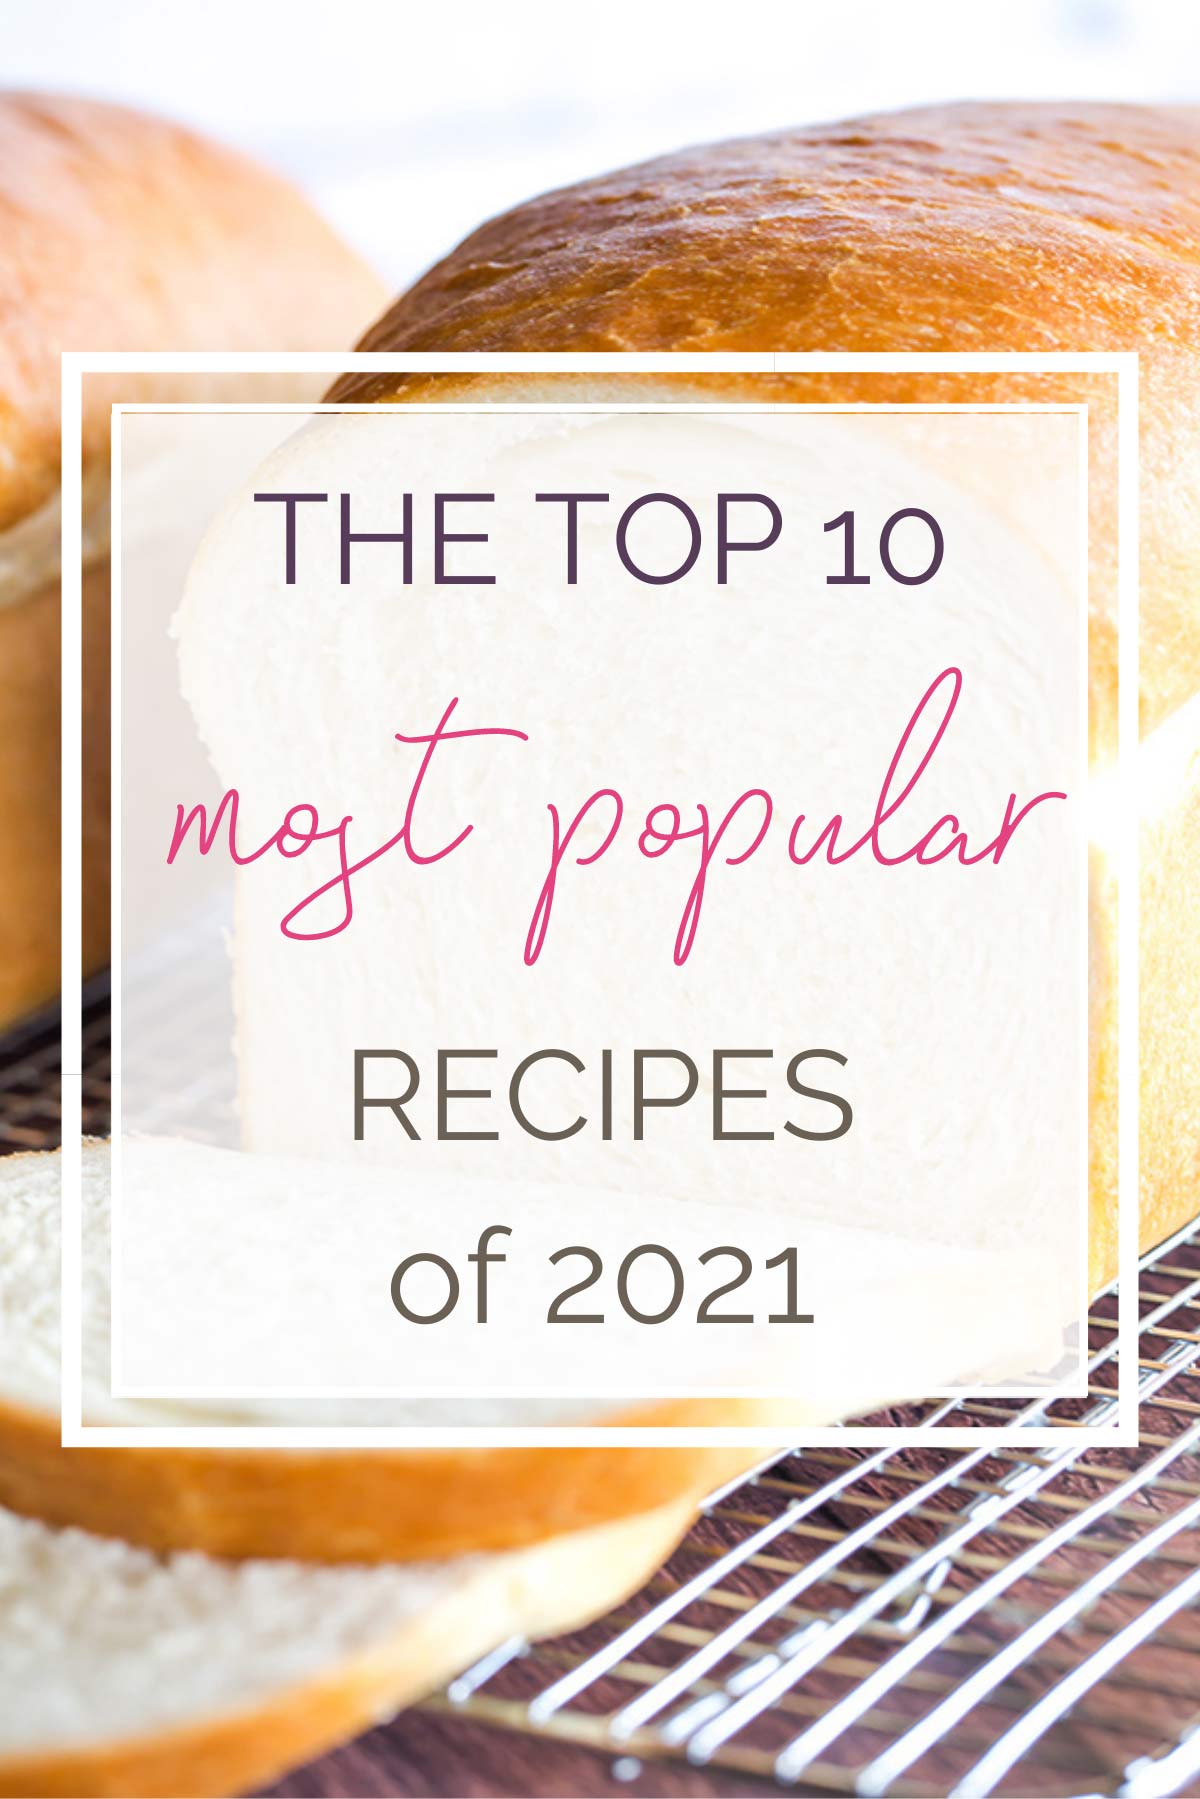 Loaf of white bread with text overlay "the top 10 most popular recipes of 2021".